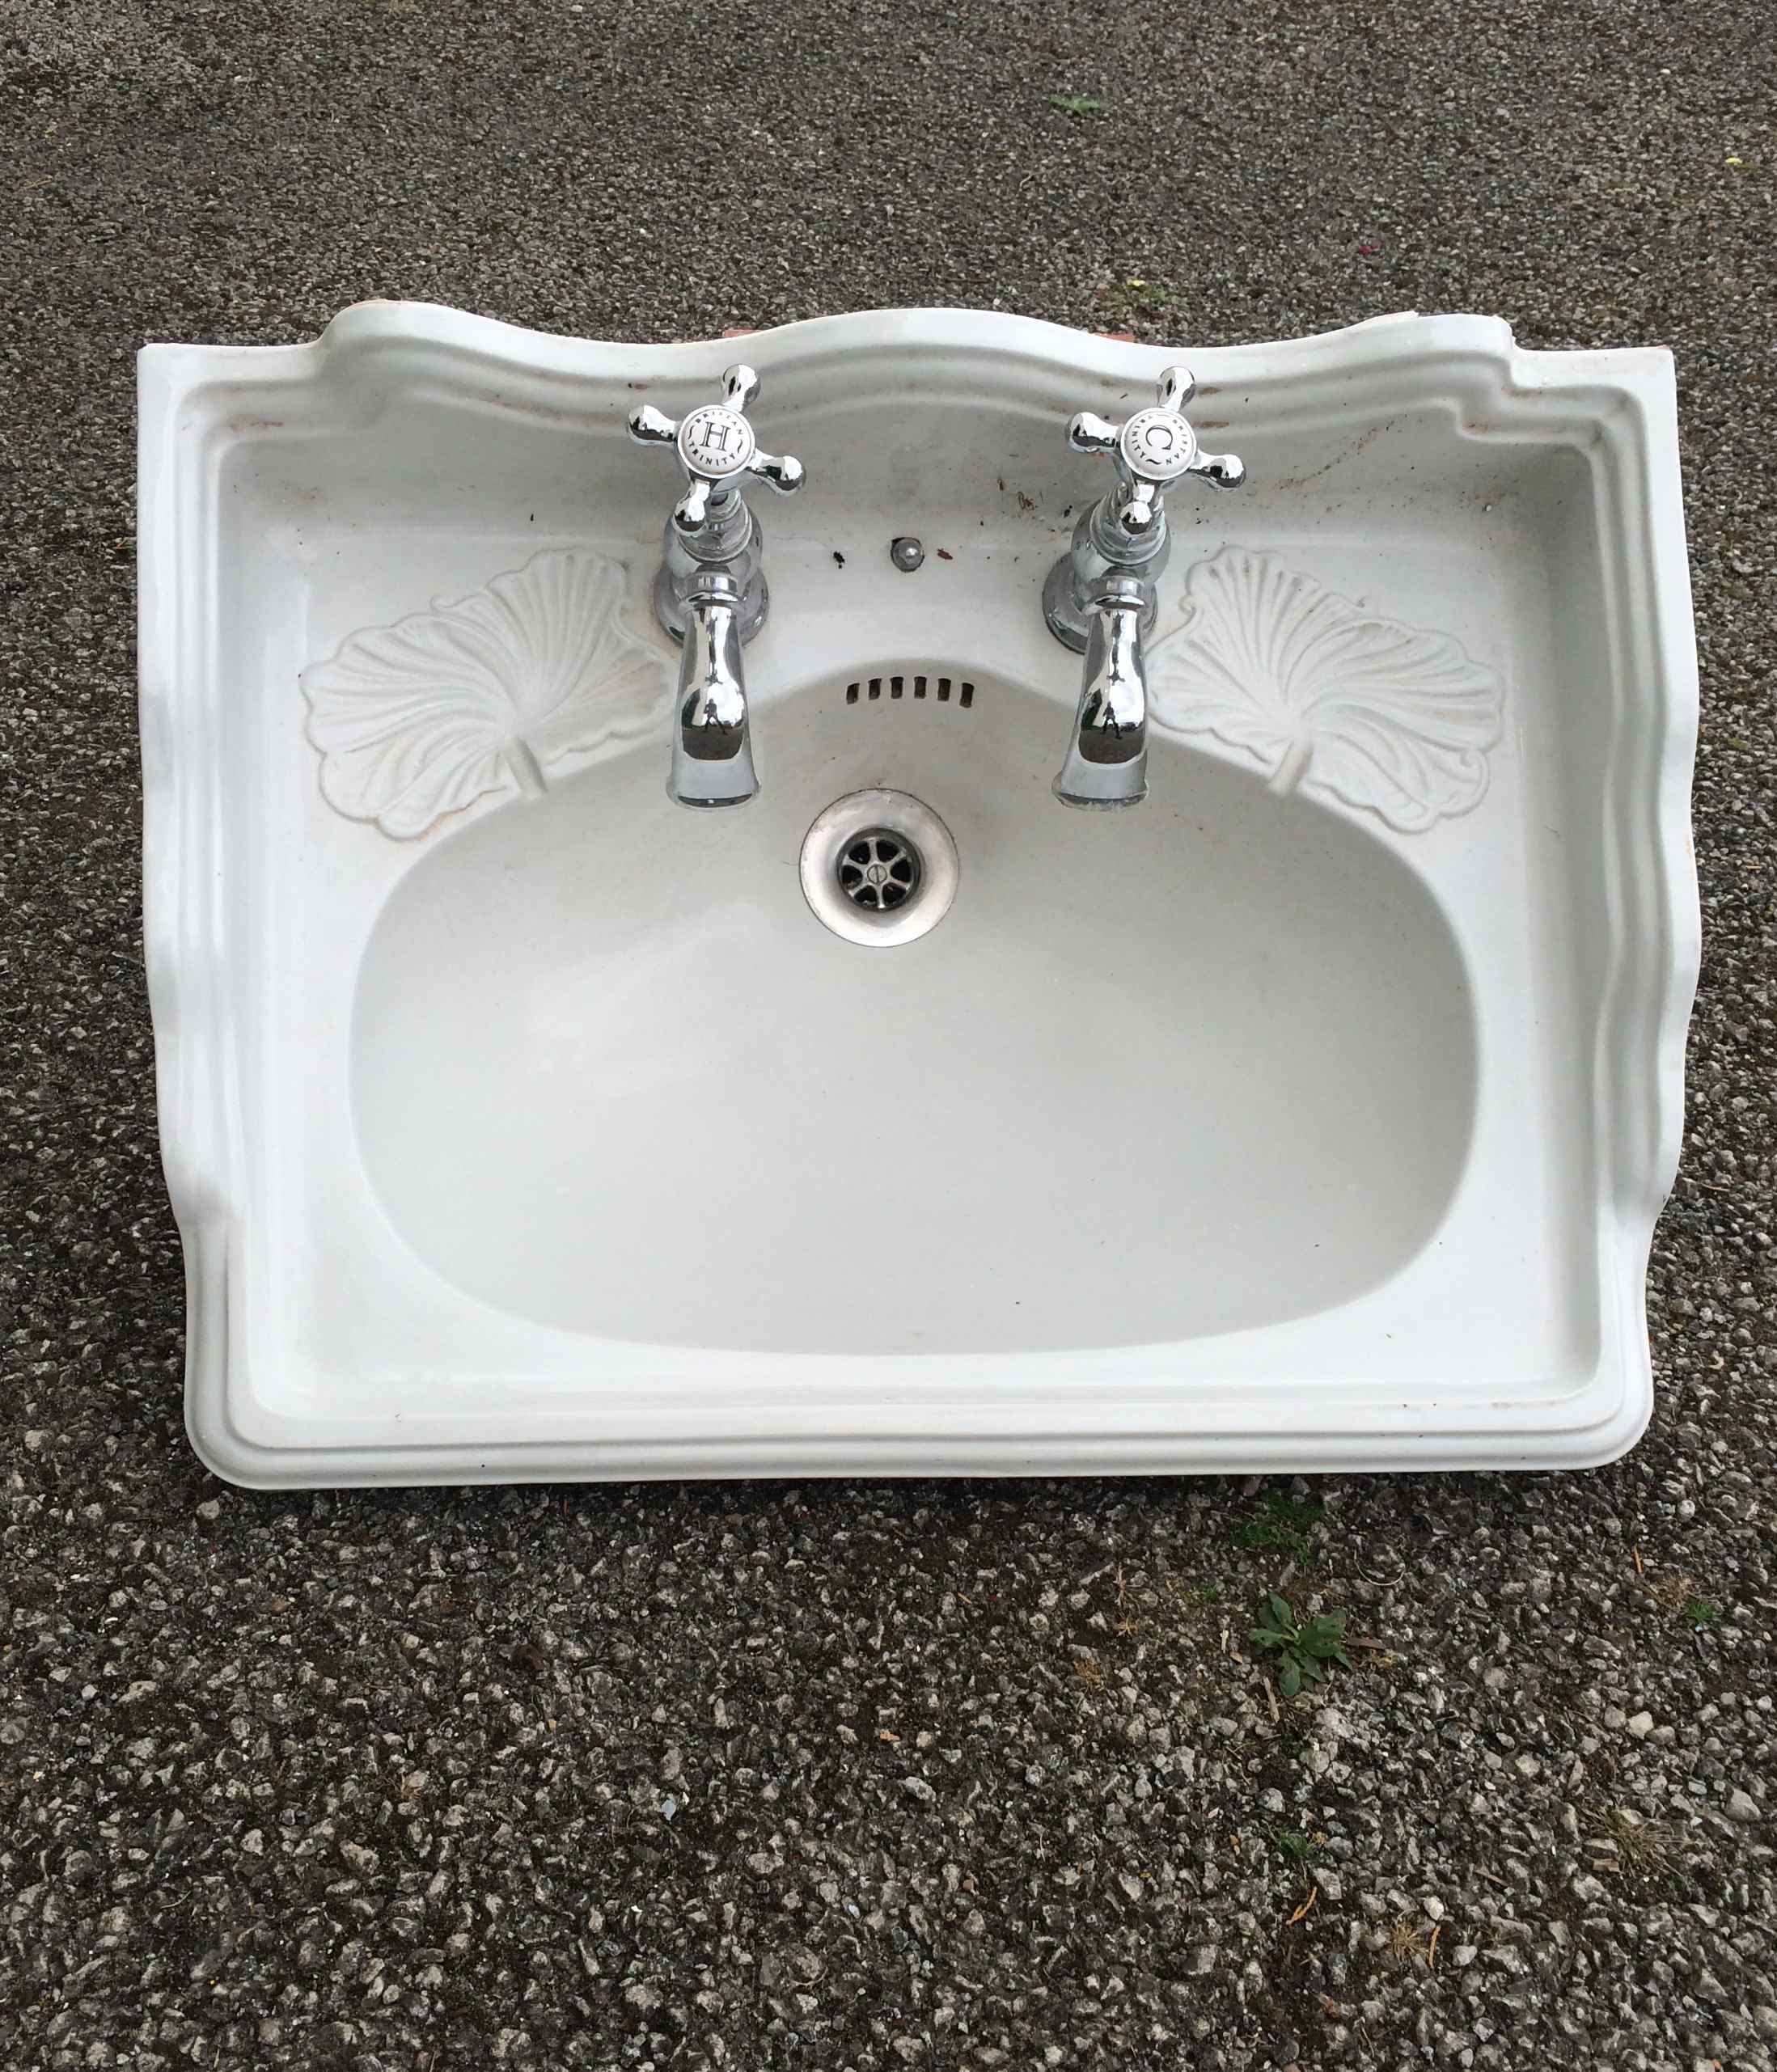 Decorative sink with fauna design and fitted taps.